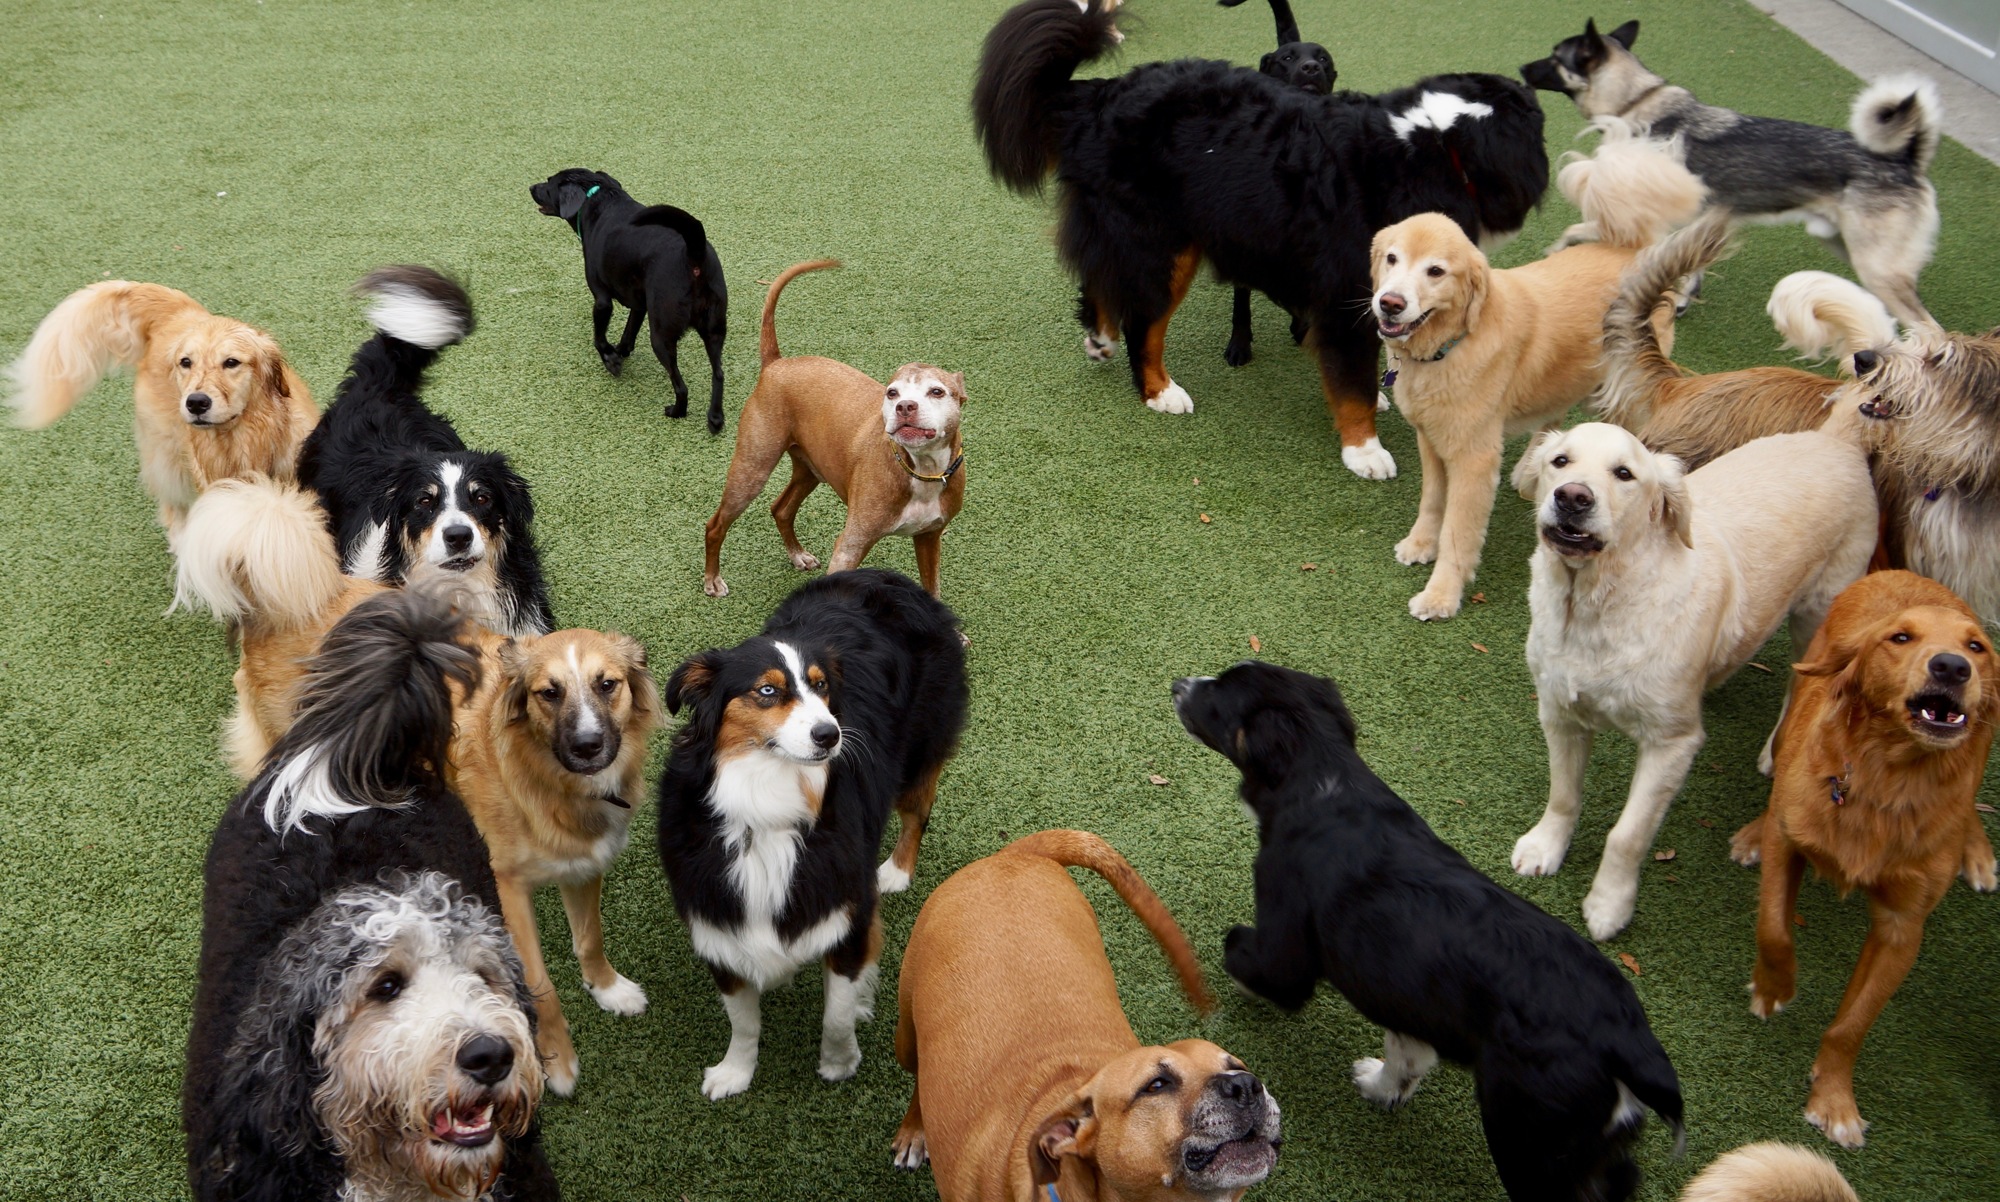 Daycare dogs gather in the outdoor play area.